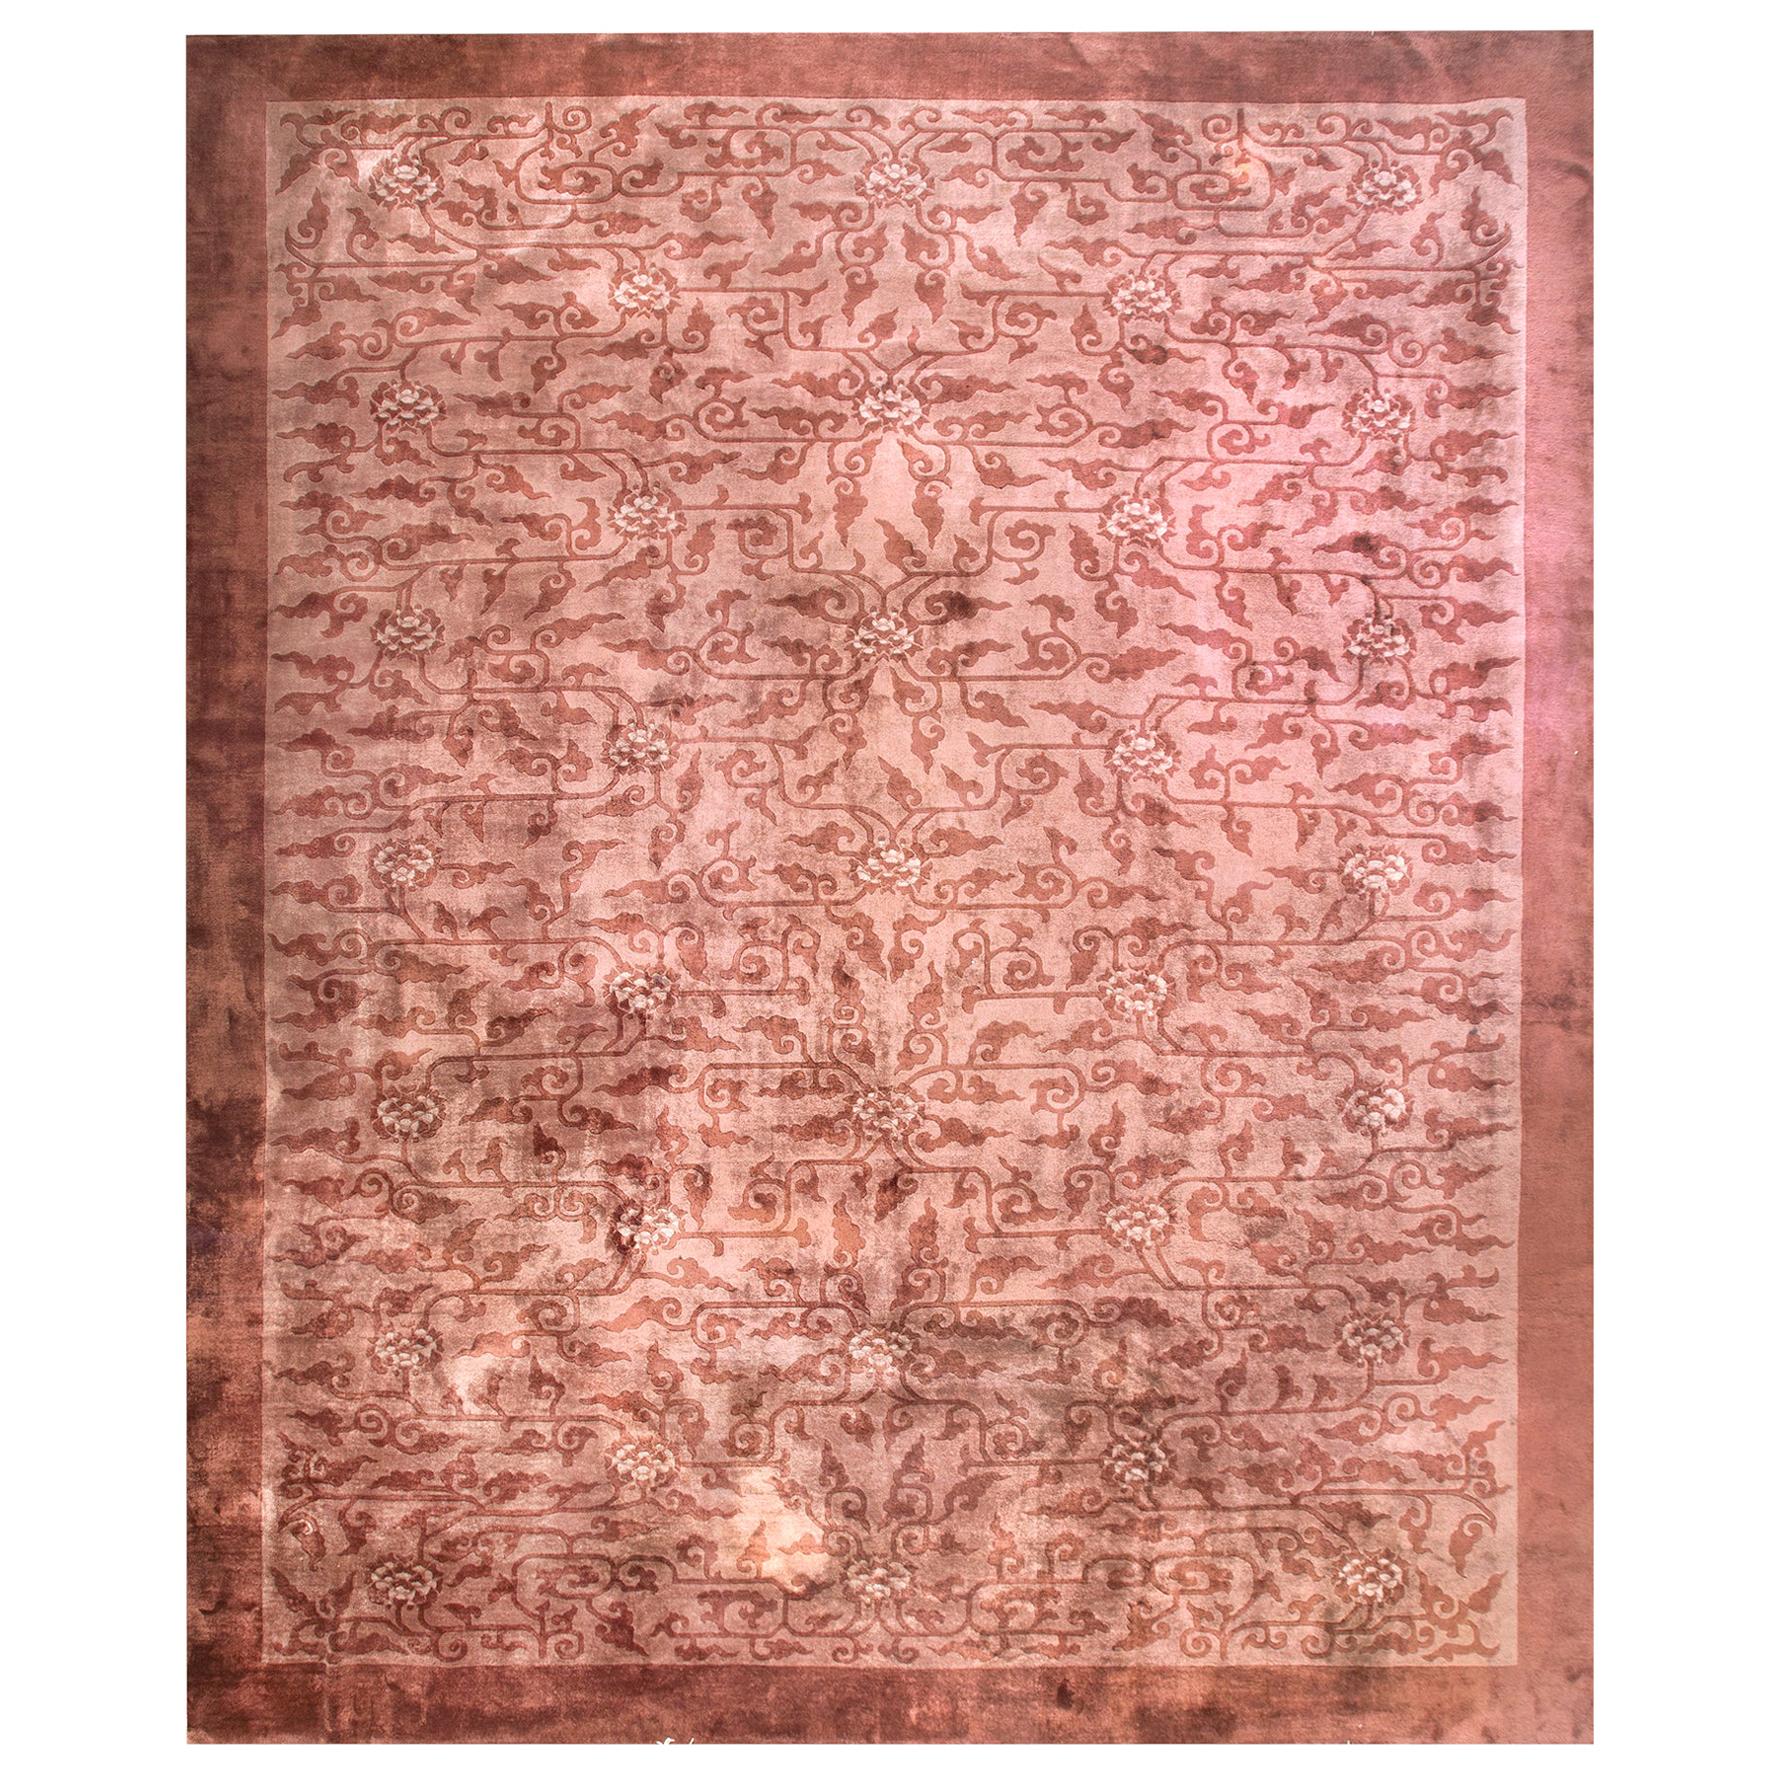 Early 20th Century Chinese Peking Carpet ( 13' x 16'6" - 396 x 503 ) For Sale